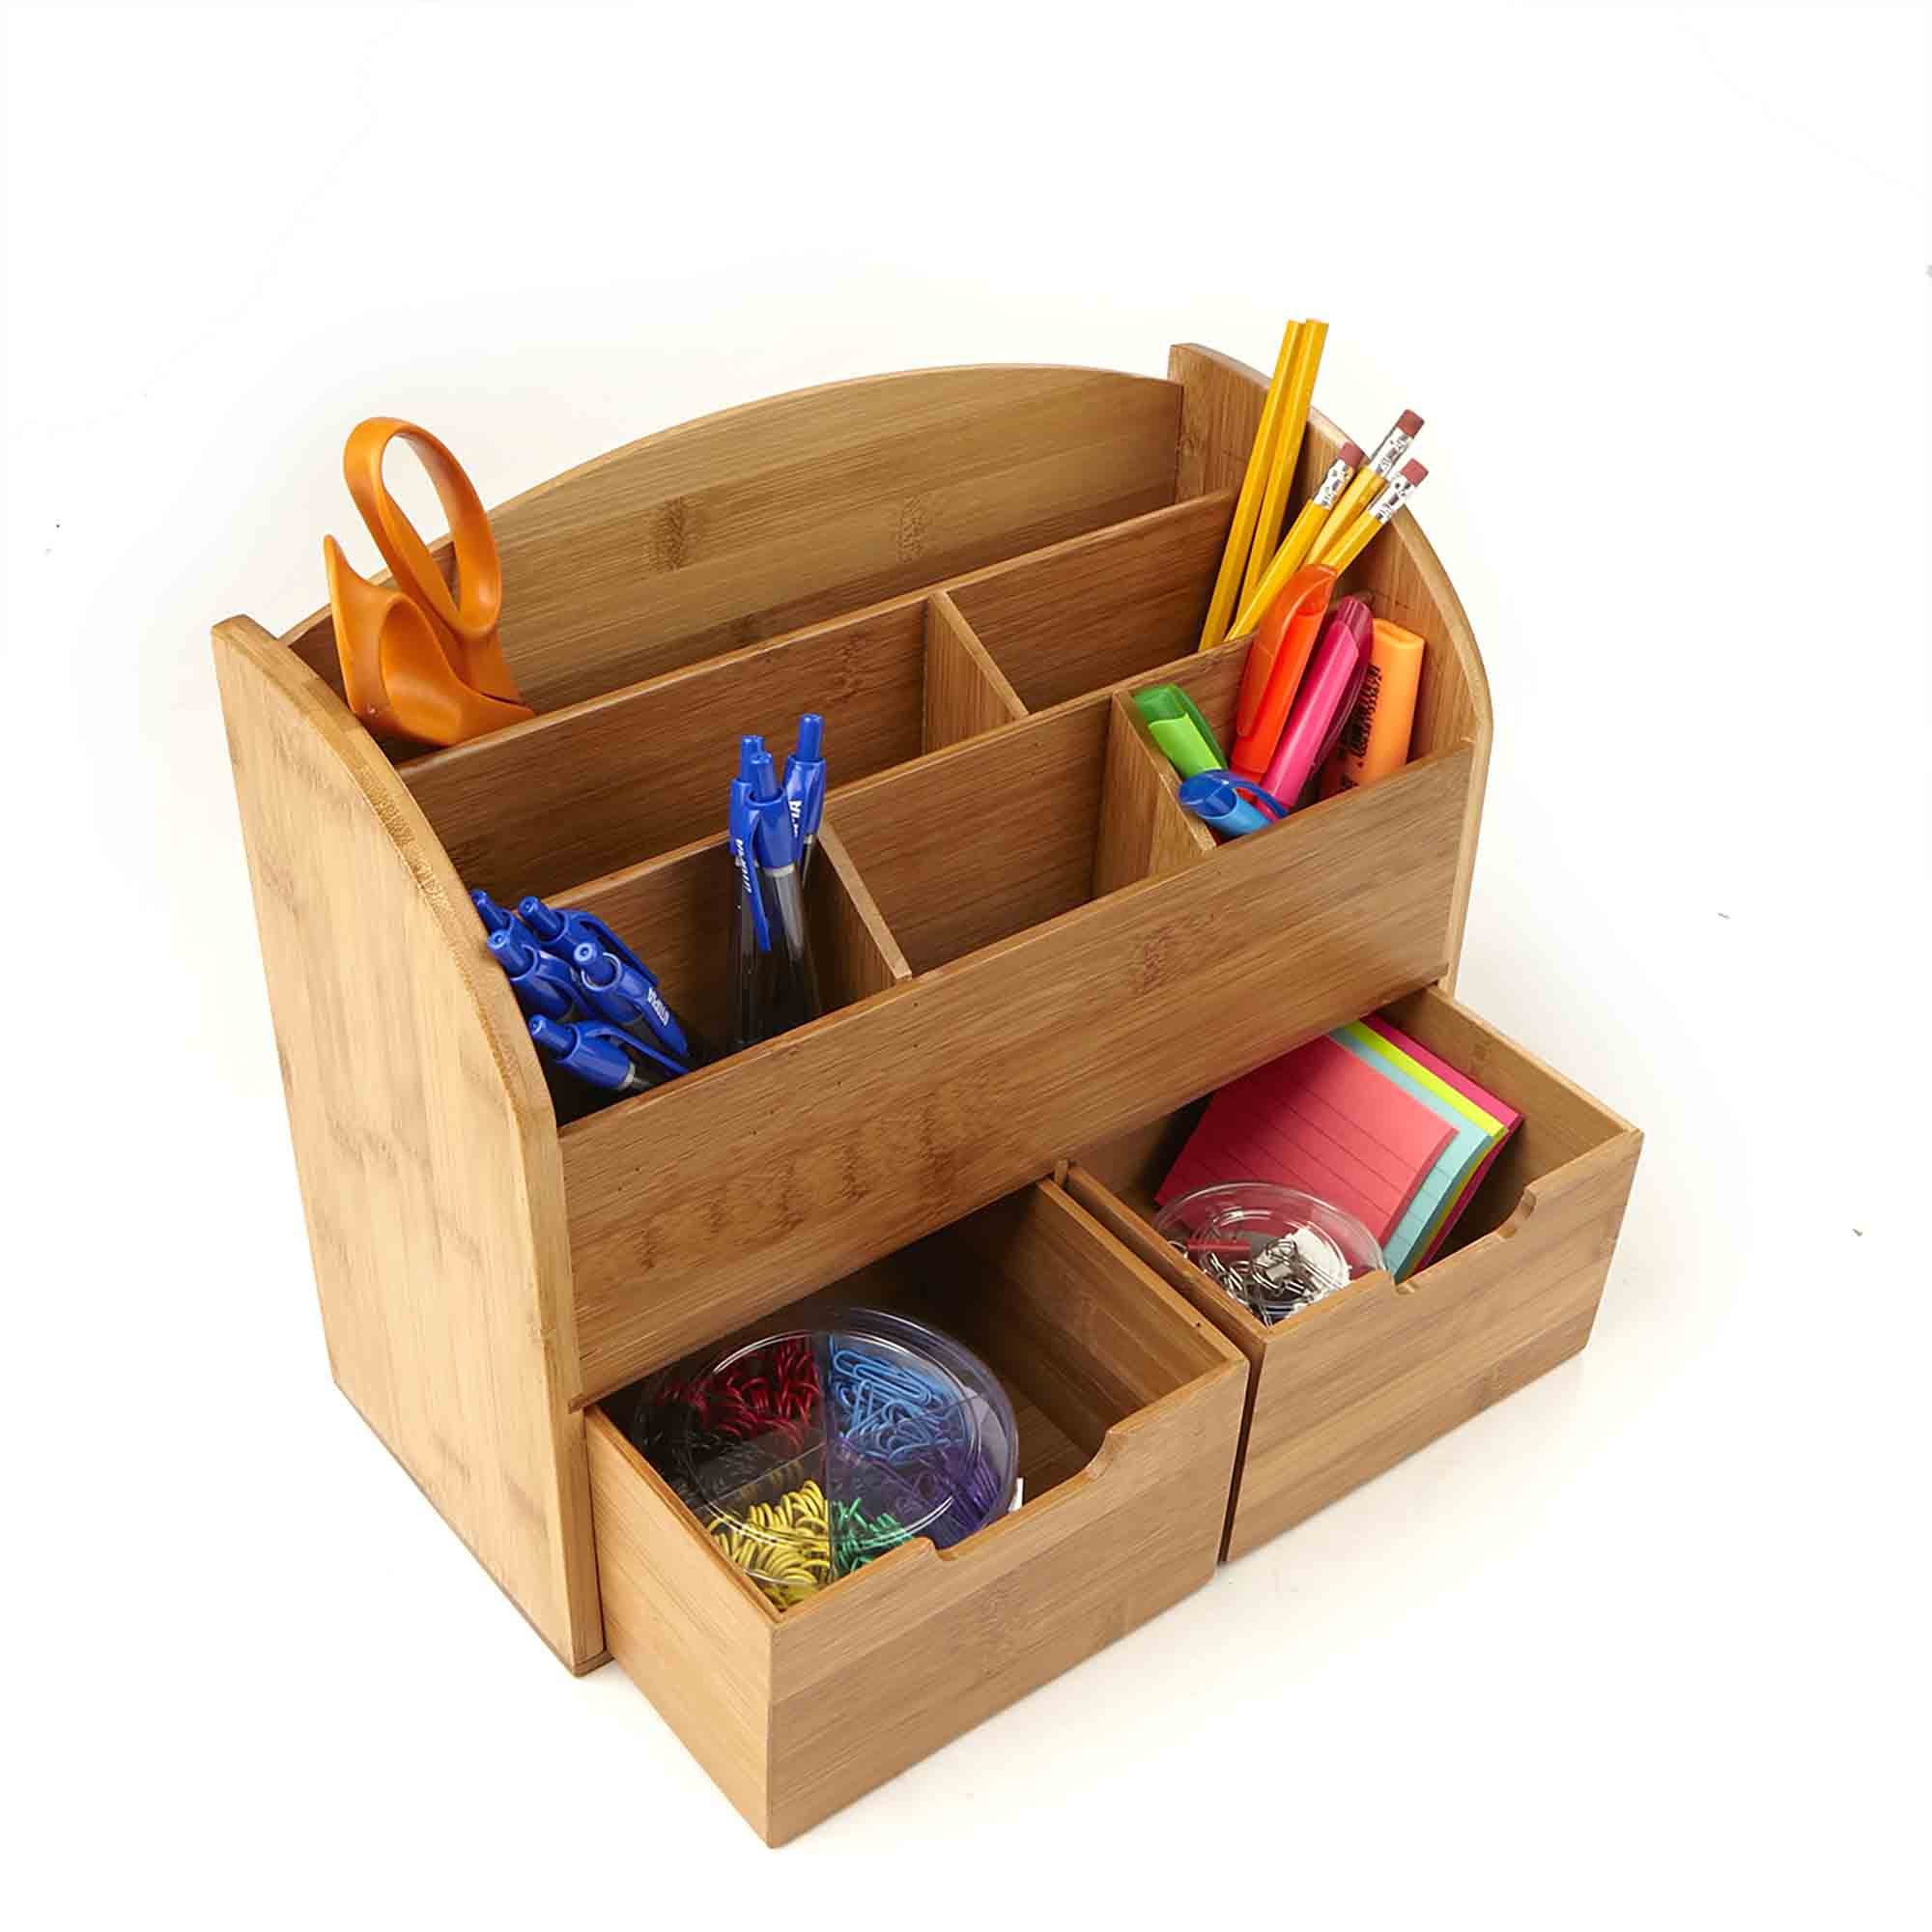 Wood Desktop Organizer with 3 Drawers 2 Shelves and 3 Compartments Office Supplies Holder Desk Accessories Desk Organizer-3+3+2 Siveit Wooden Desk Organizer